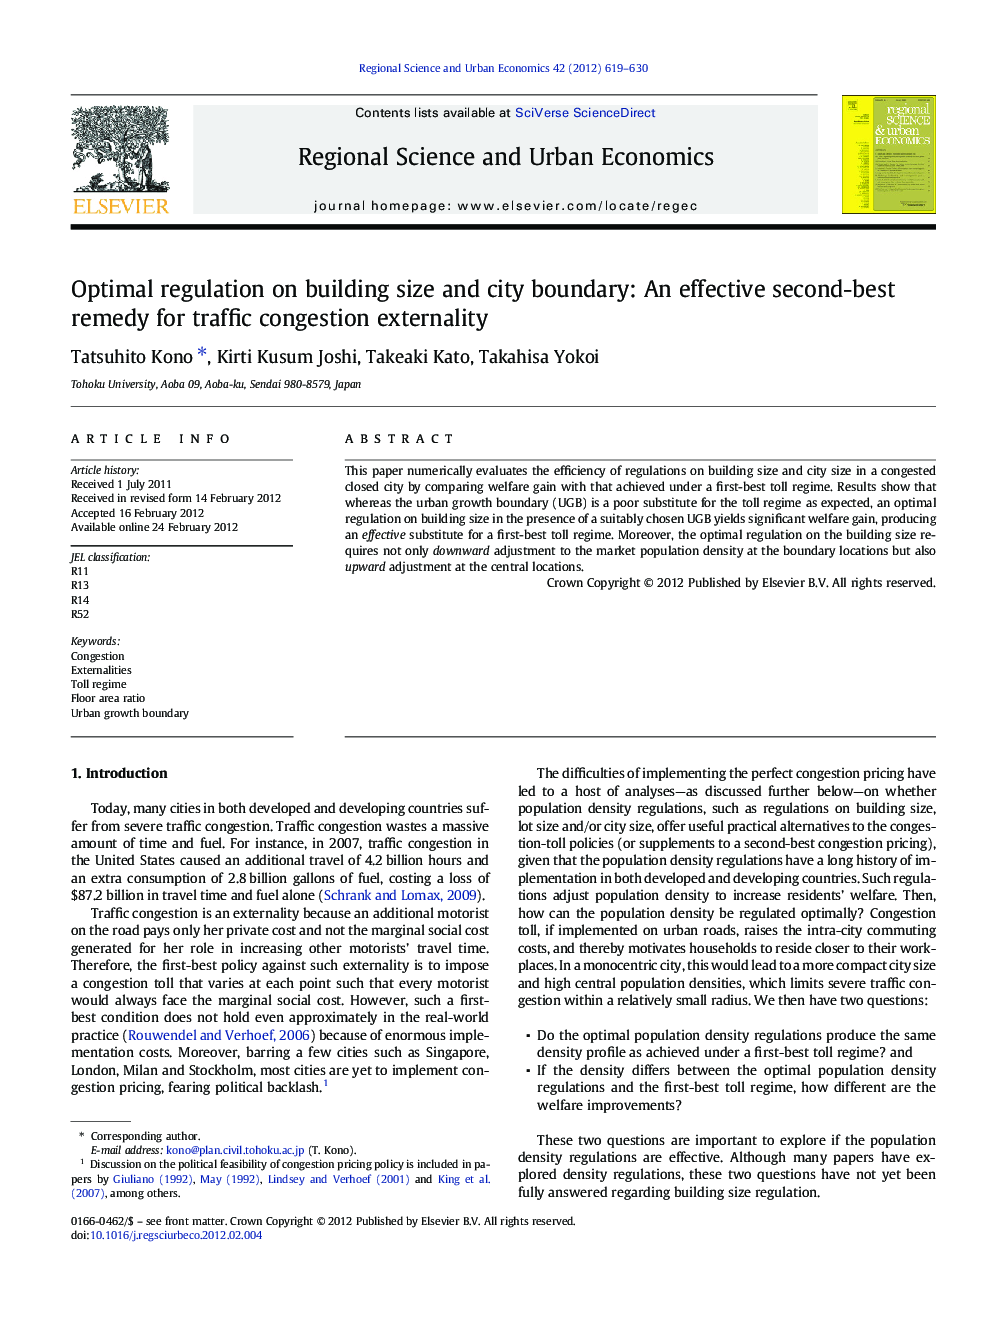 Optimal regulation on building size and city boundary: An effective second-best remedy for traffic congestion externality